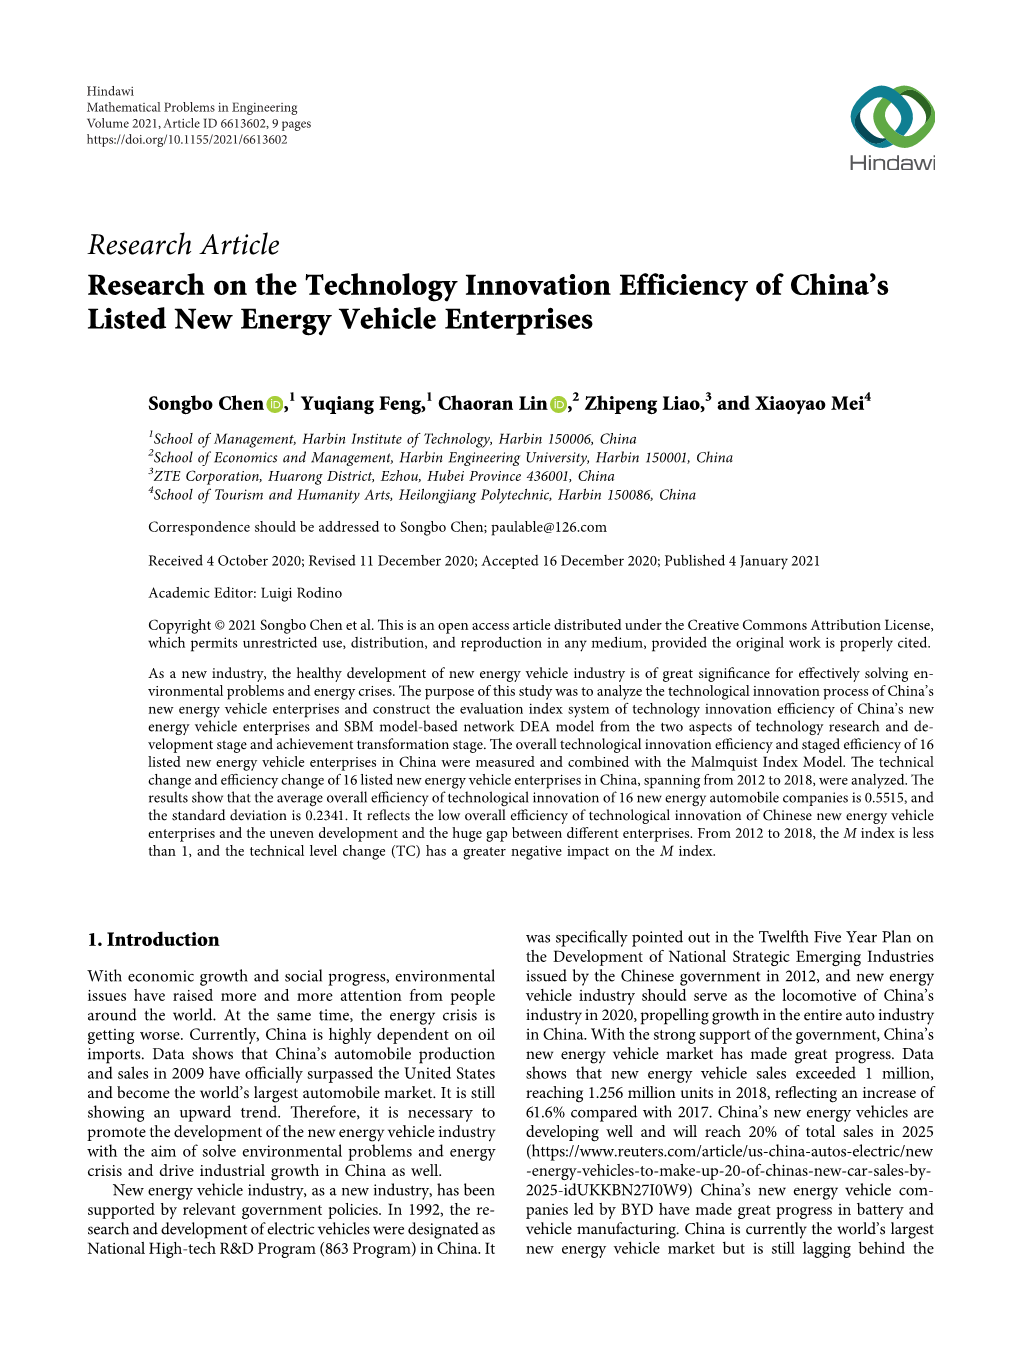 Research Article Research on the Technology Innovation Efficiency of China’S Listed New Energy Vehicle Enterprises